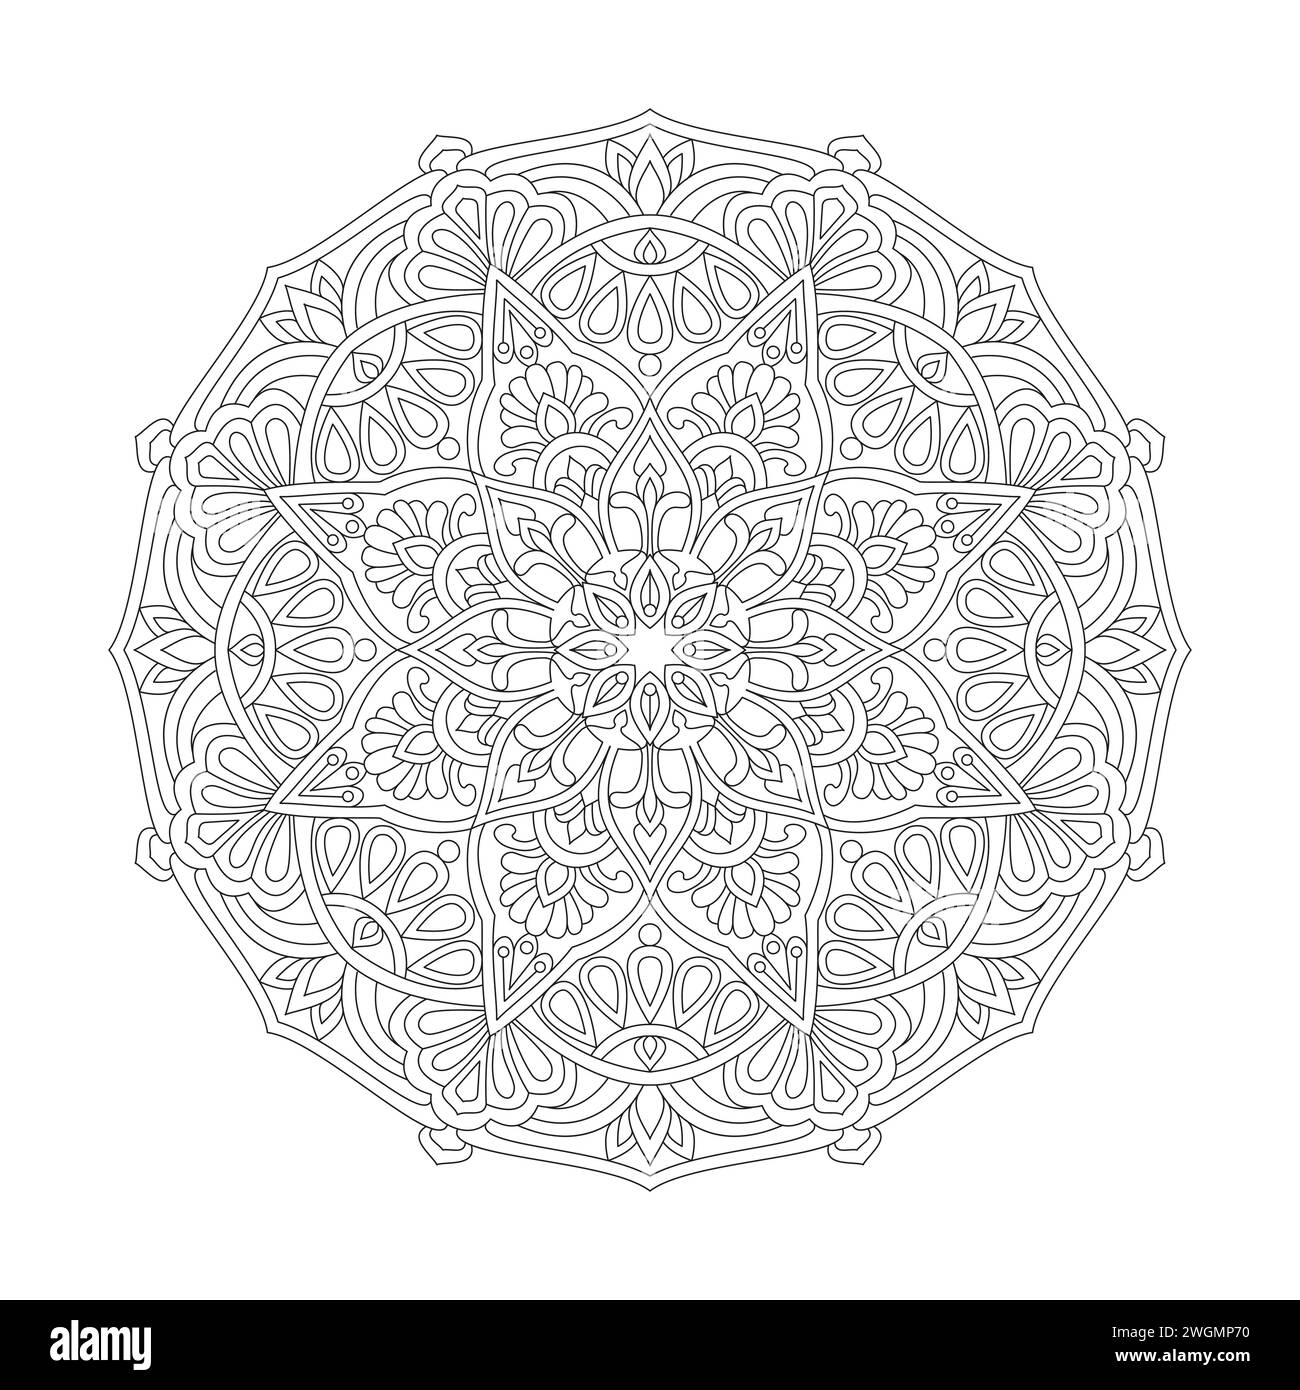 Attractive Decoration Mandala Coloring Book Page for kdp Book Interior. Peaceful Petals, Ability to Relax, Brain Experiences, Harmonious Haven, Peacef Stock Vector